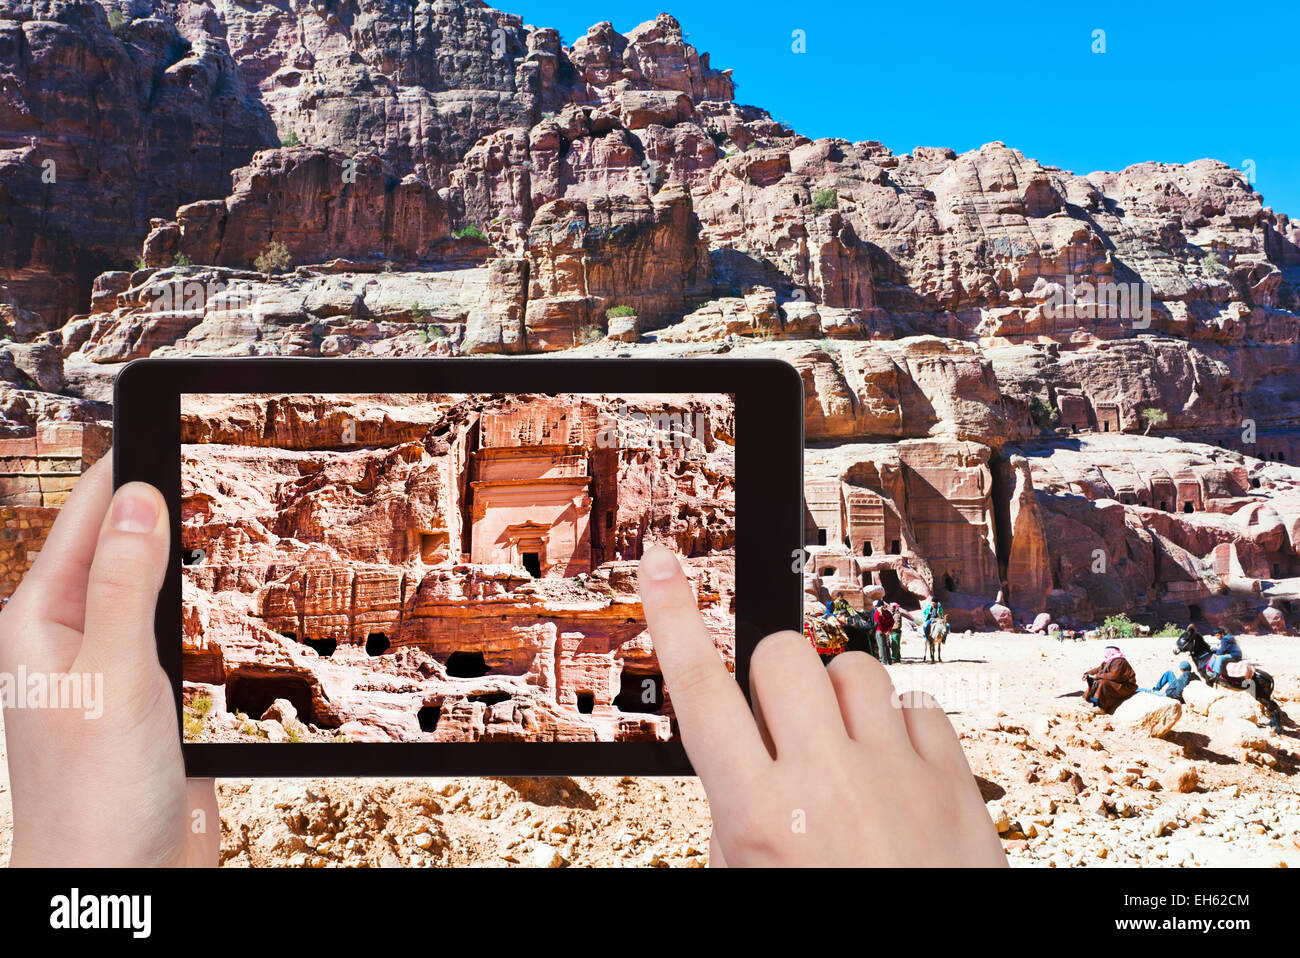 travel concept - tourist taking photo of tombs and houses in stone city Petra, Jordan on mobile gadget Stock Photo